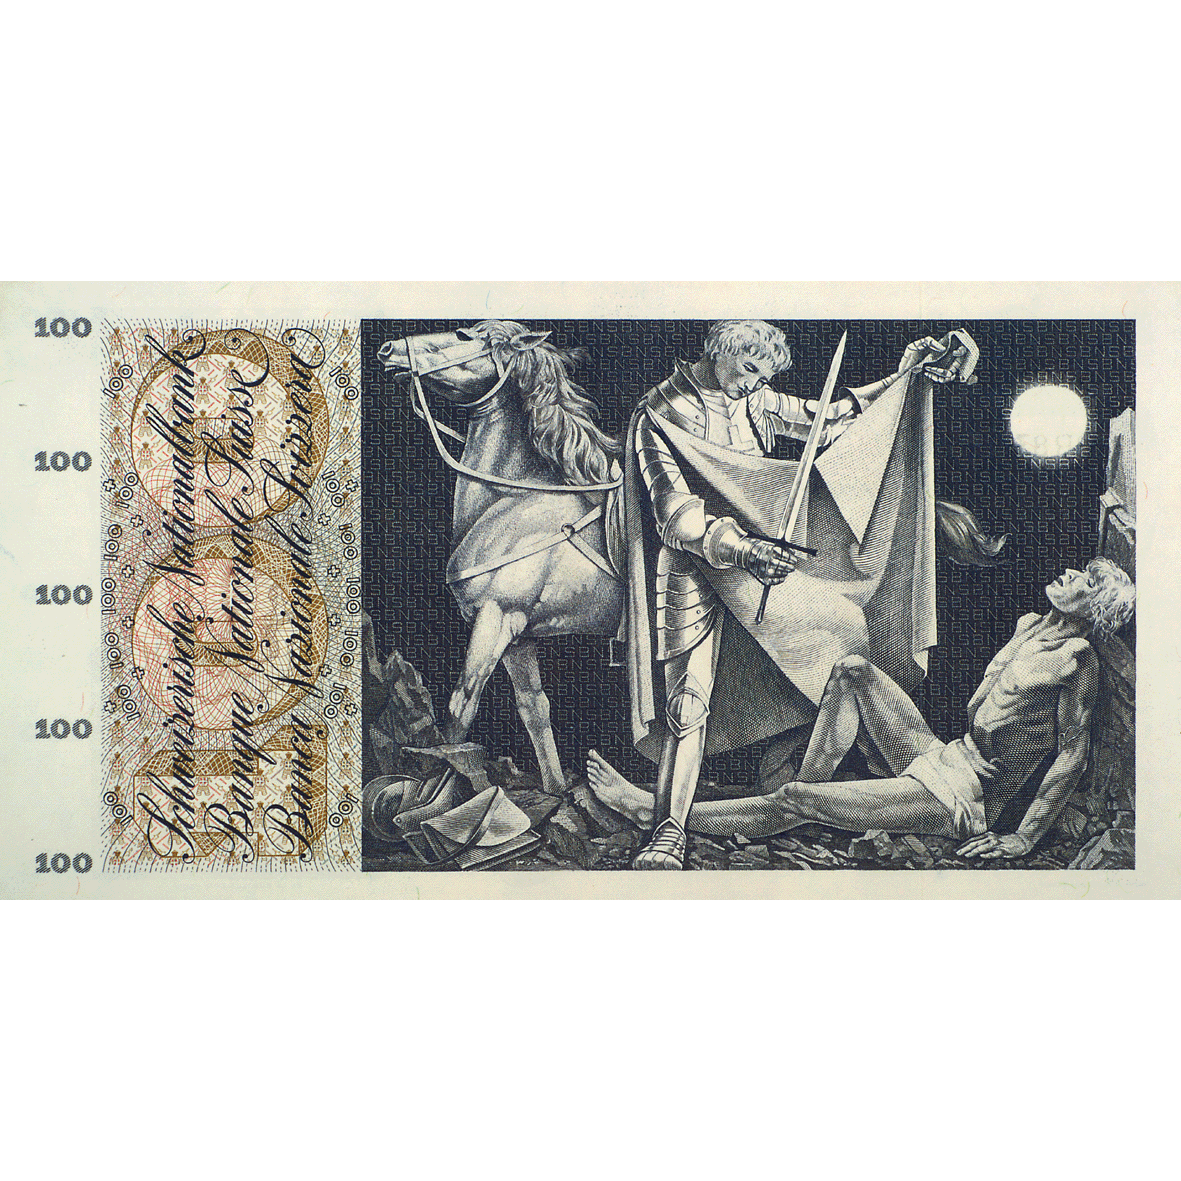 Swiss Confederation, 100 Francs (5th Banknote Series, in Circulation 1956-1980) (reverse)